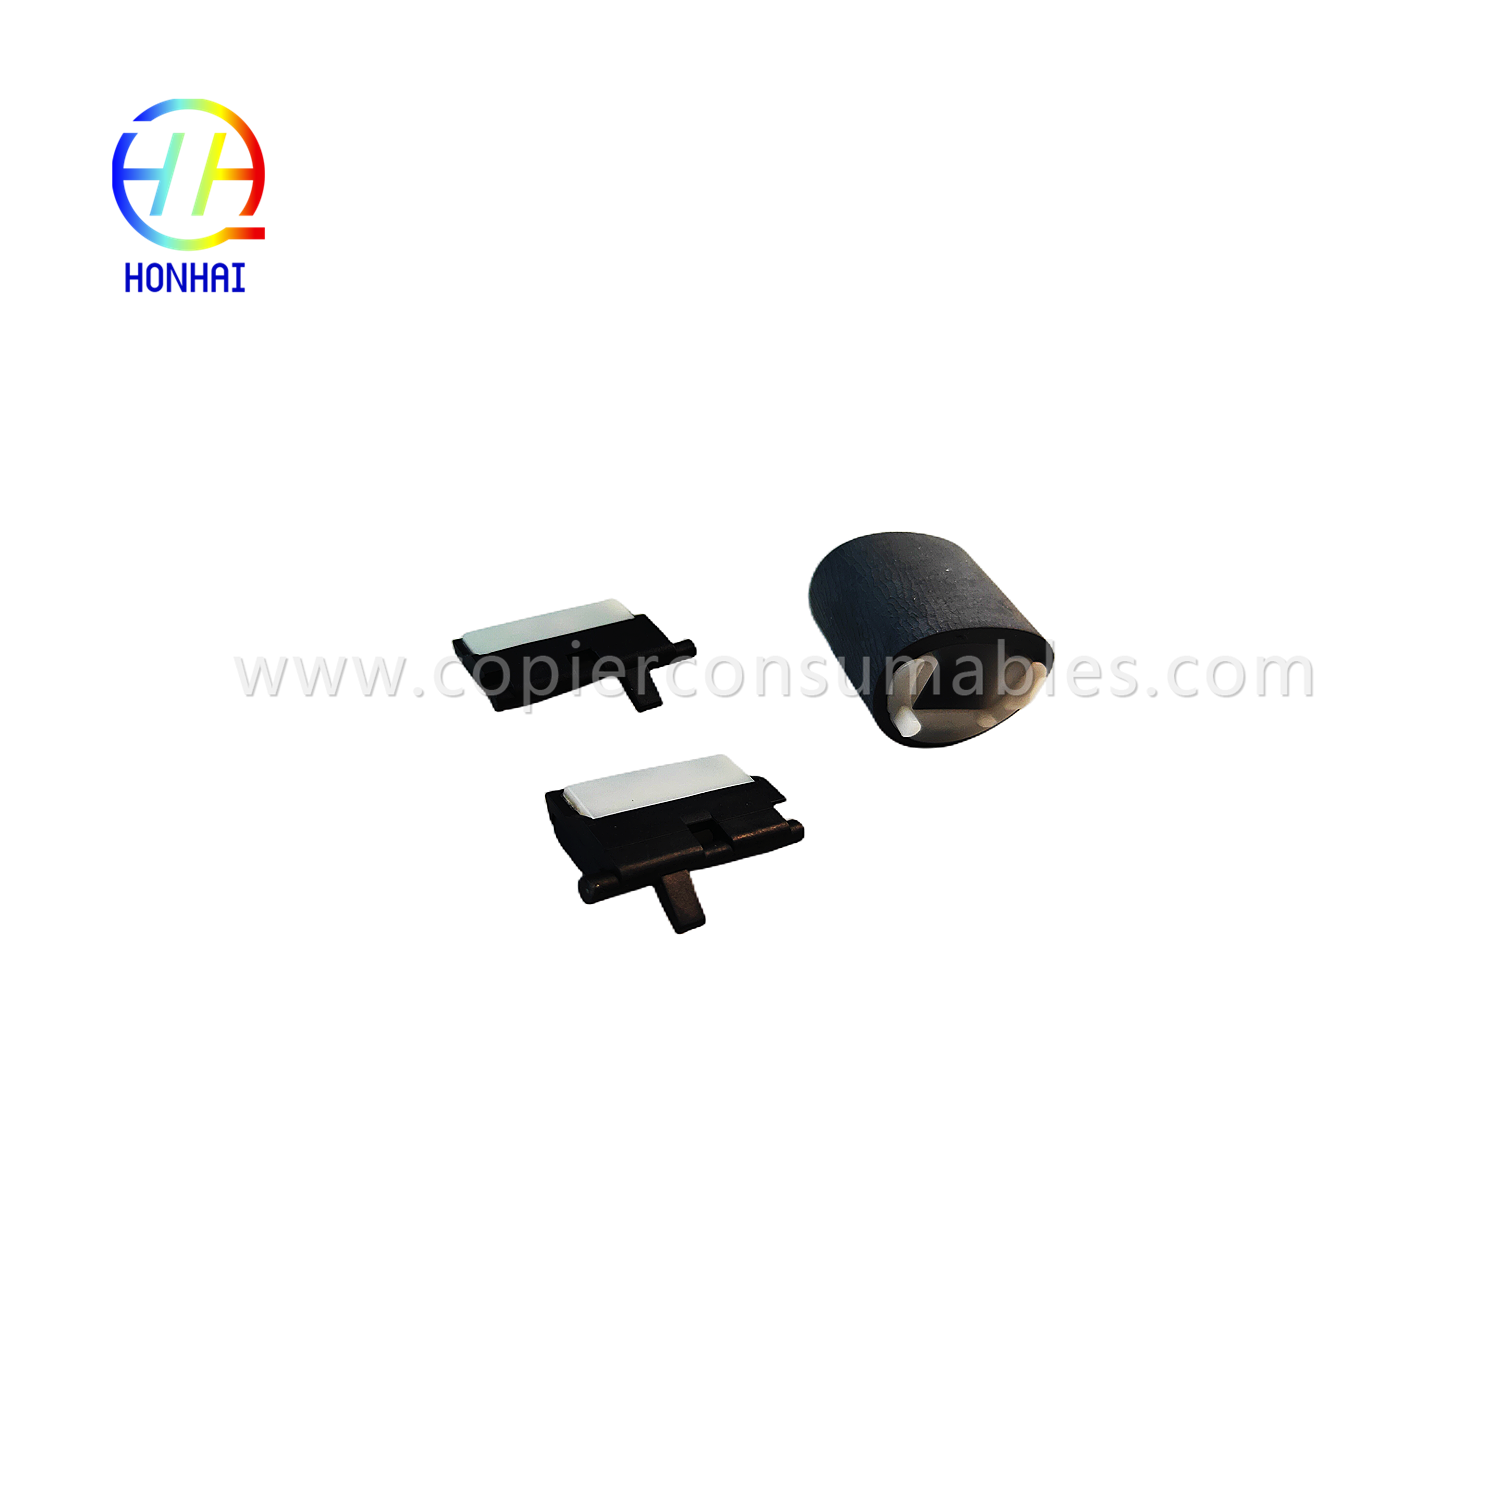 https://www.copierconsumables.com/paper-pickup-roller-separates-pad%ef%bc%88set%ef%bc%89for-hp-pagewide-x585z-x451dn-x476dn-x551dw-x576dw-556dn-586- 452dn-477dn-552-577z-cb780-60012-ထုတ်ကုန်/